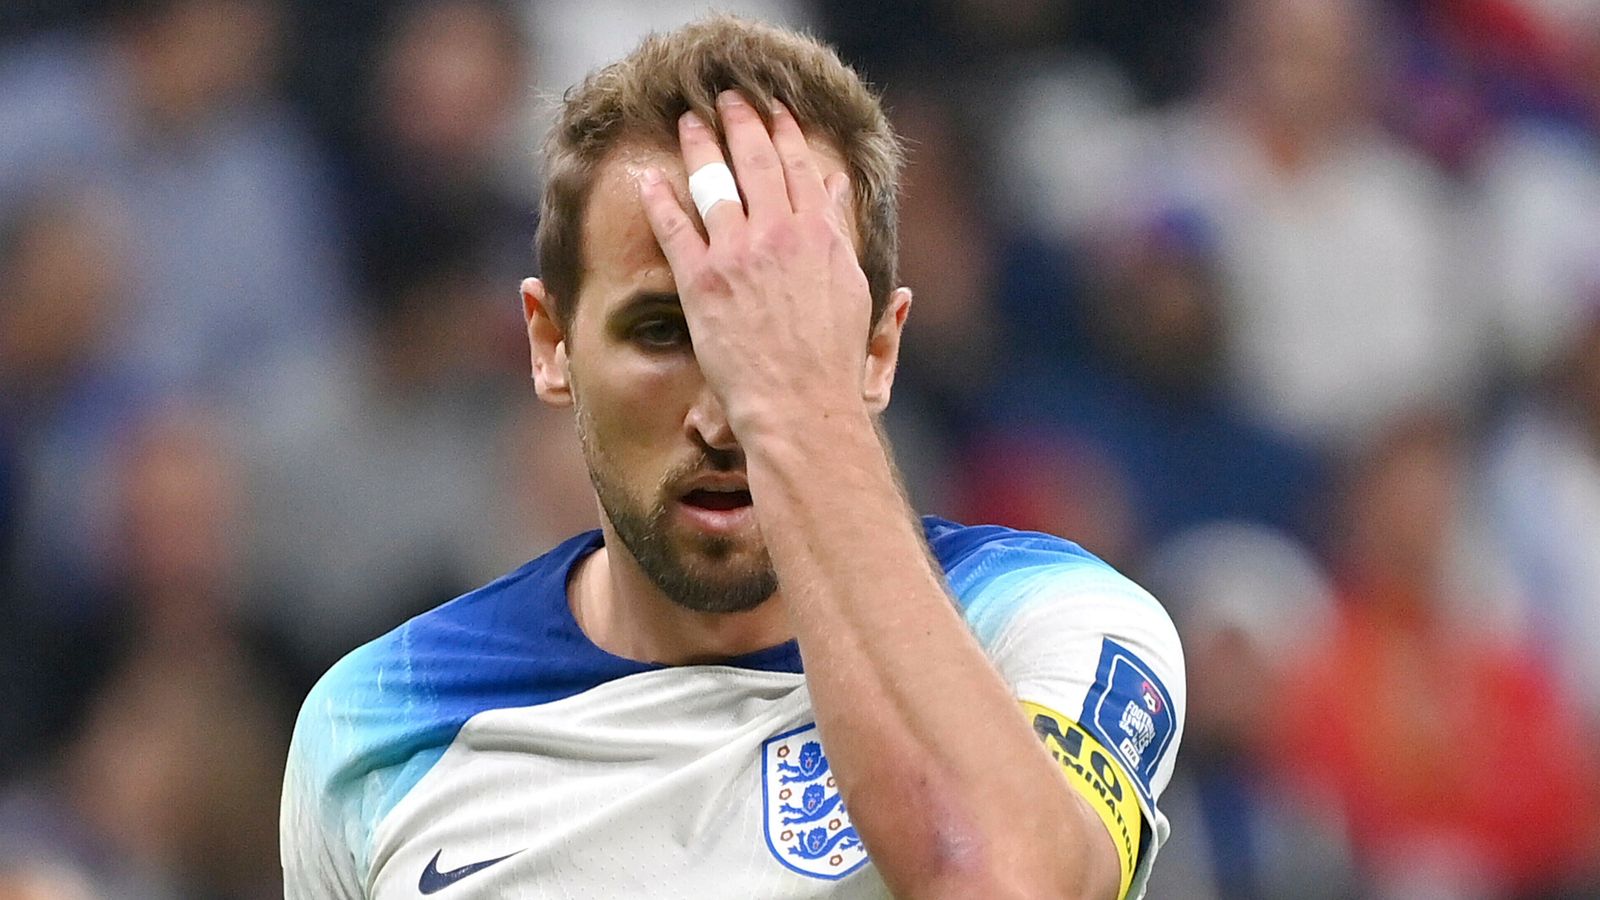 Harry Kane and World Cup stars have little rest before the Premier League resumes – will they really be ready?